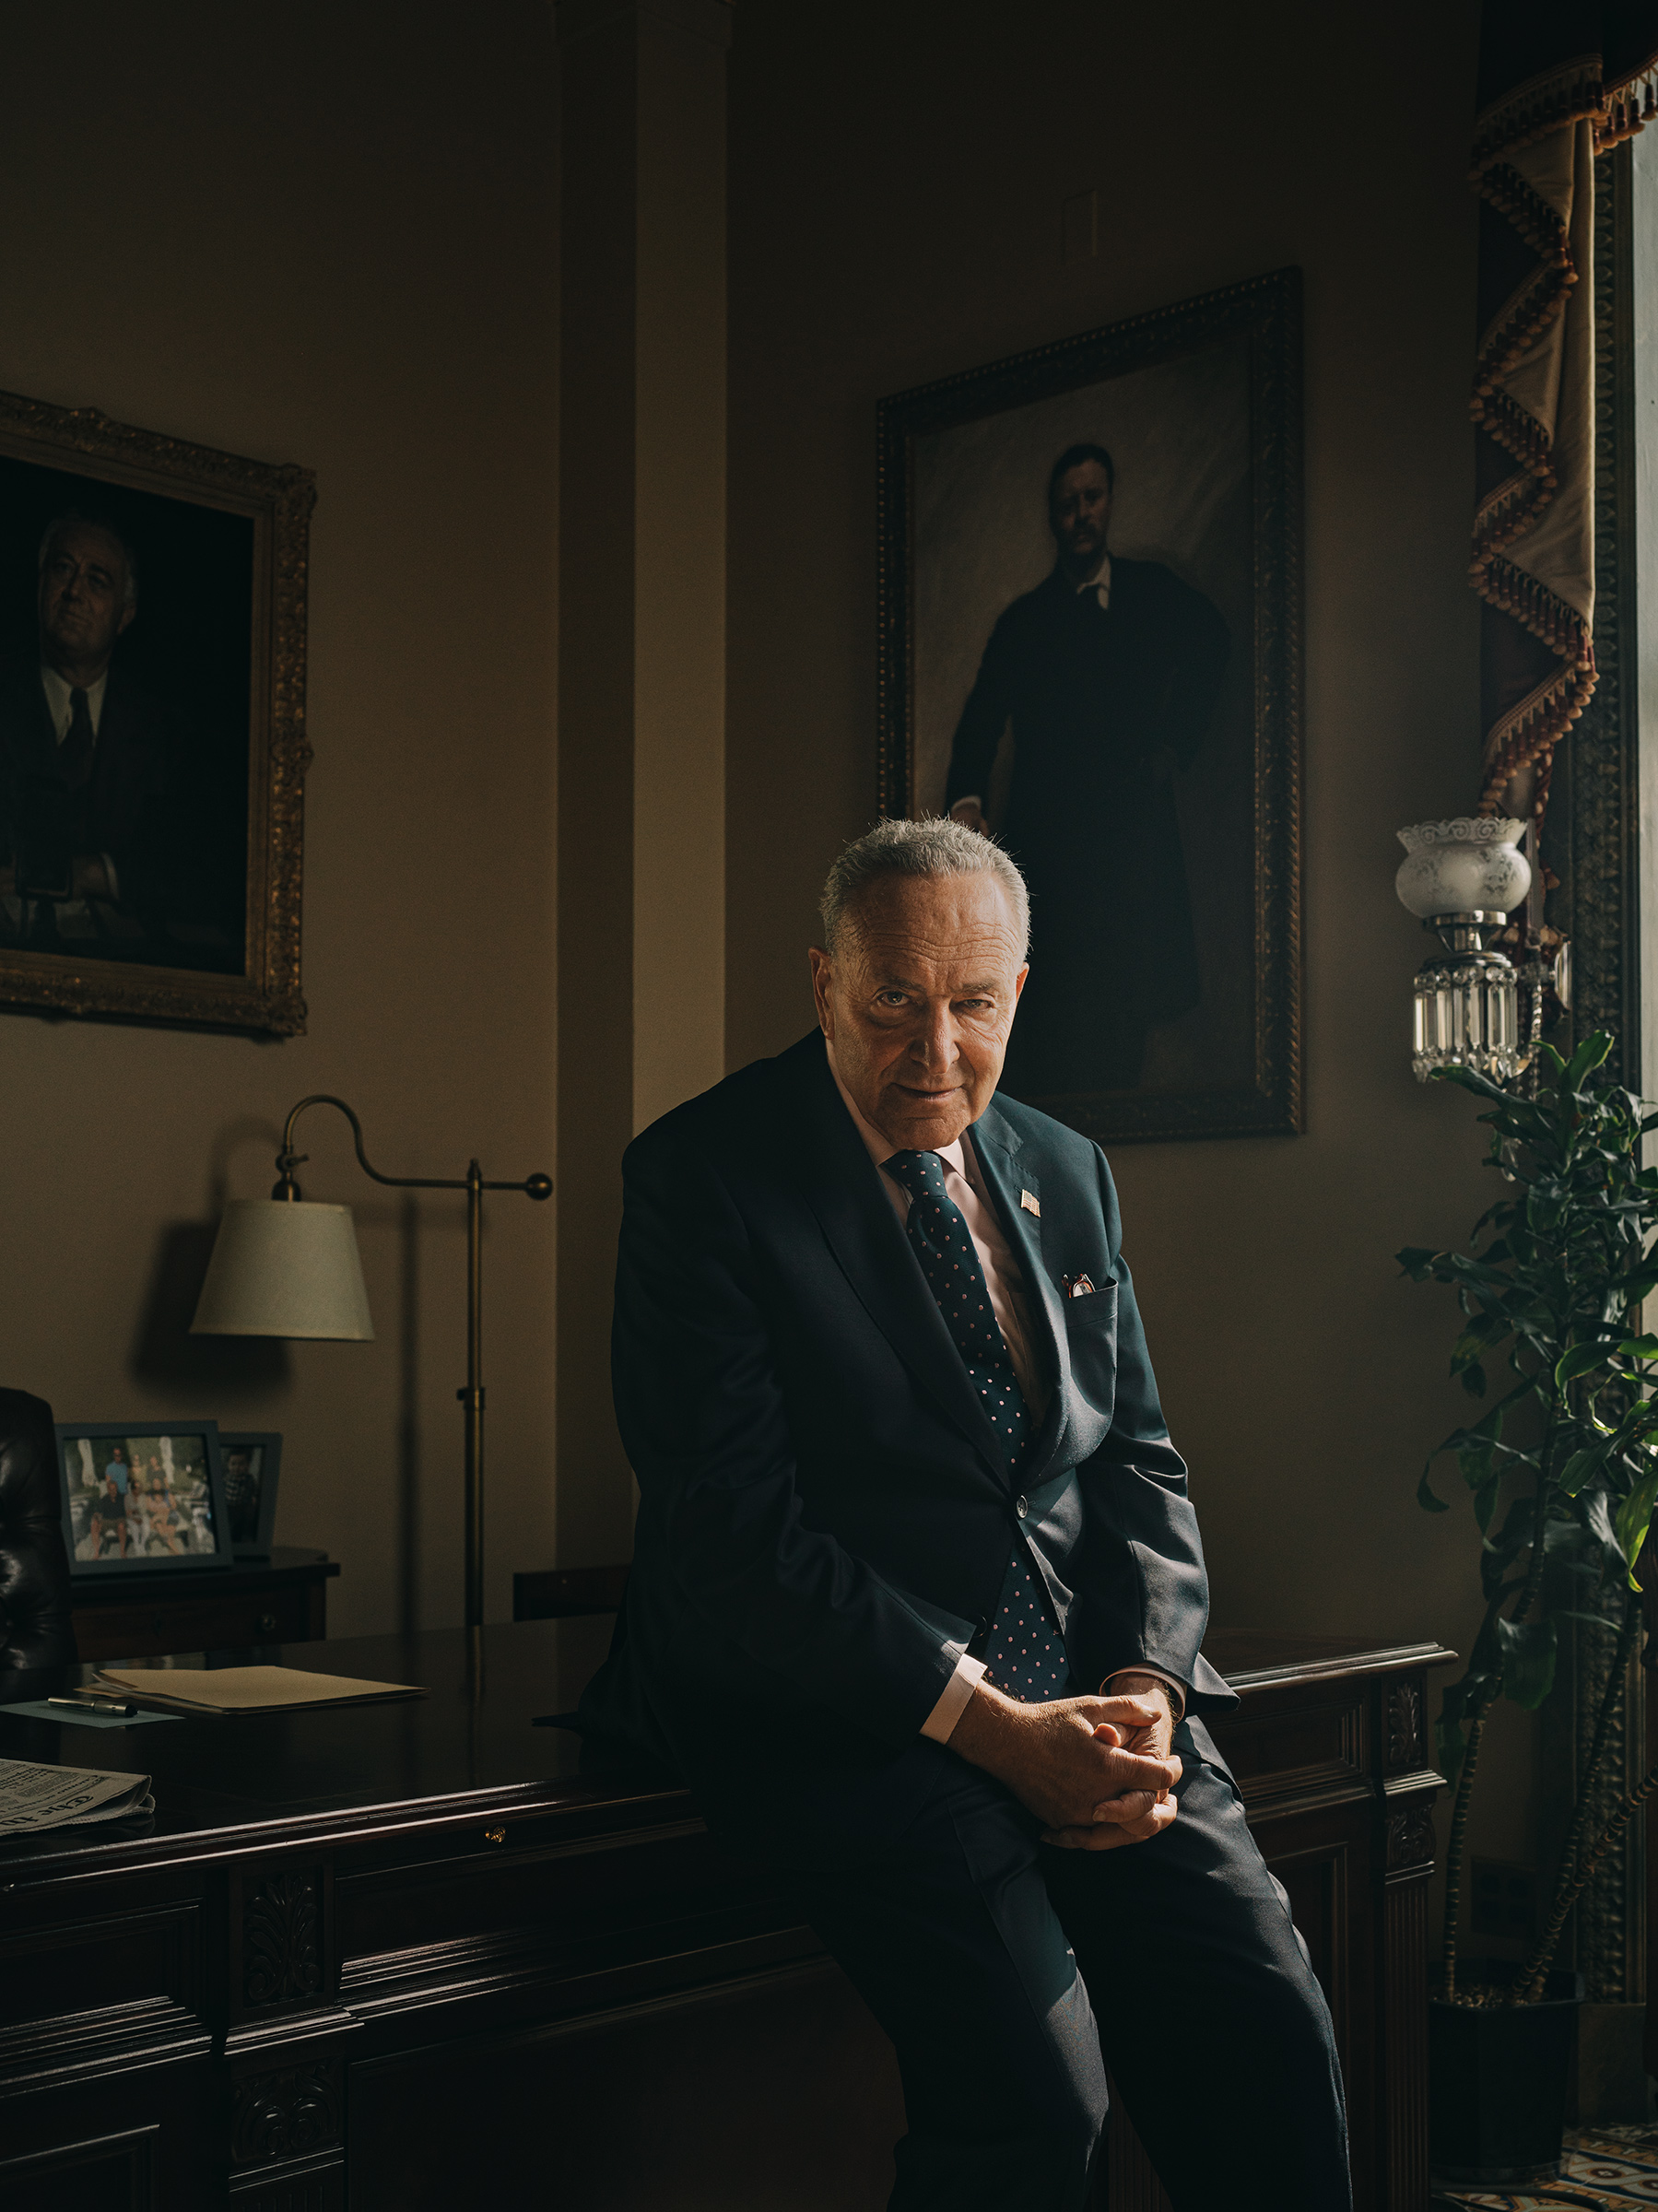 <strong>Chuck Schumer</strong> in his office at the Capitol. "<a href="https://time.com/6094557/chuck-schumer-profile/">The Great Kibitzer: How Chuck Schumer Got the Senate Moving Again</a>," Sept. 13 issue. (Greg Kahn for TIME)